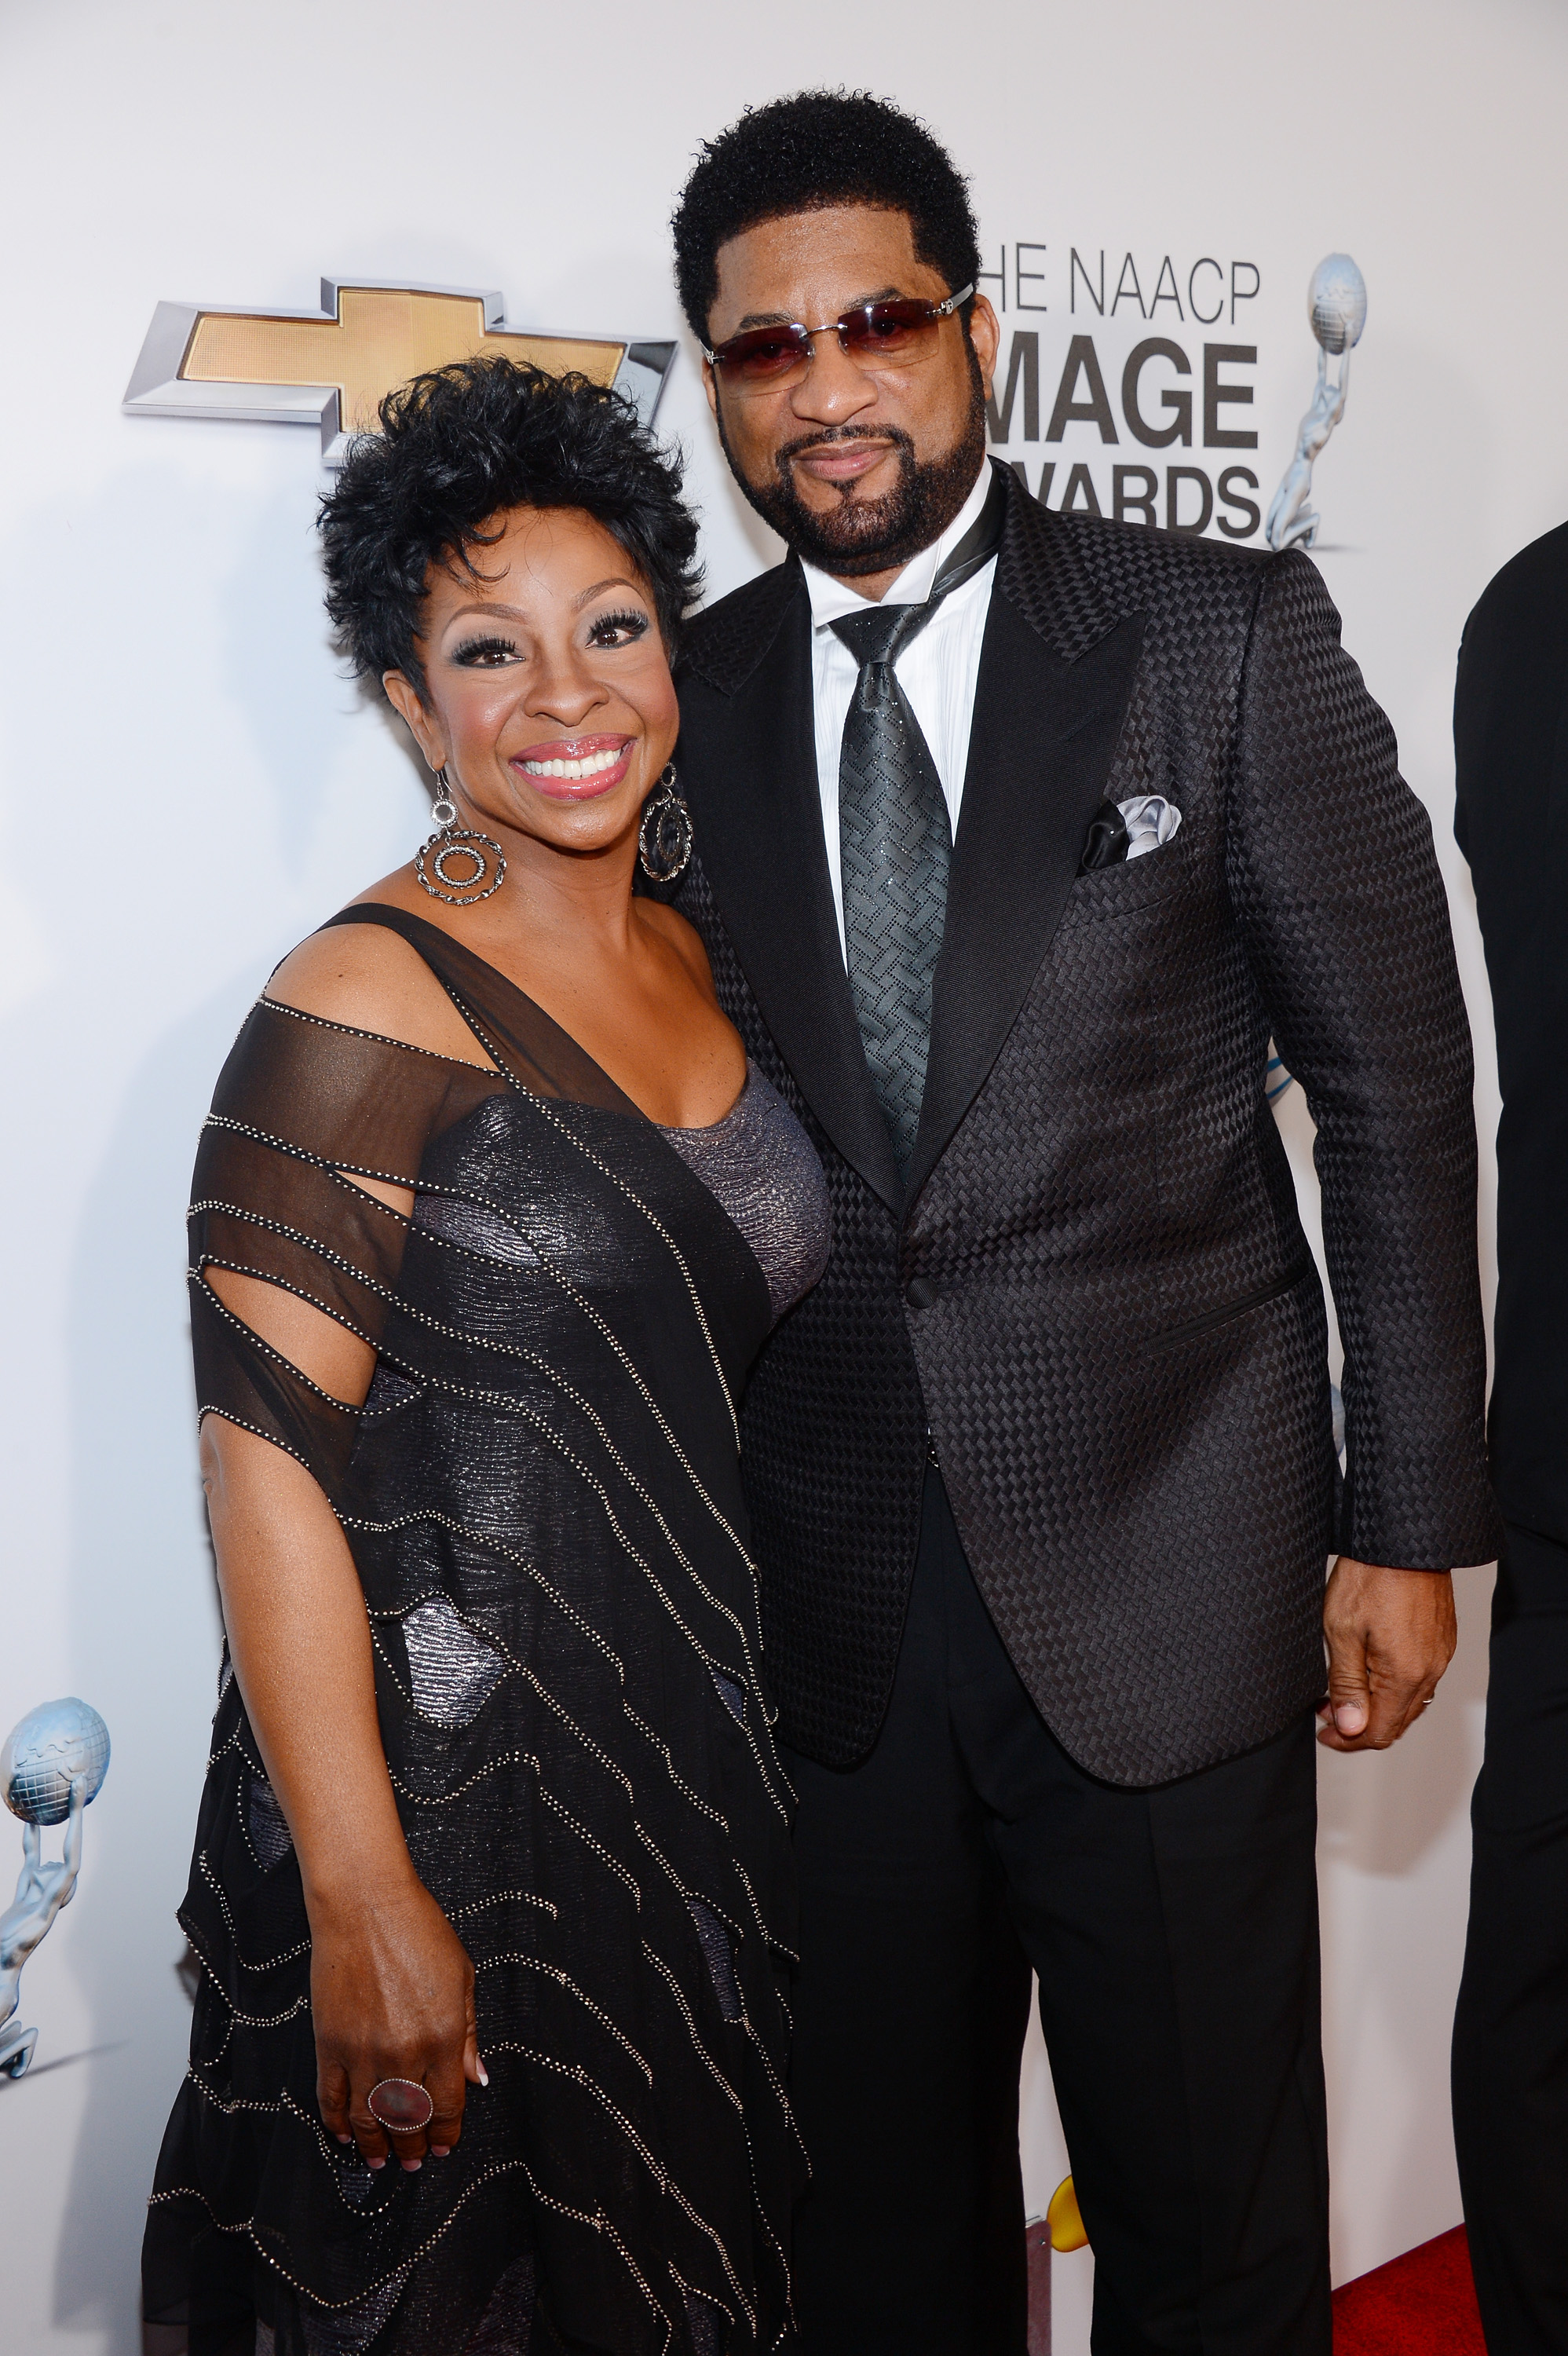 Gladys Knight and her husband William McDowell at the 44th NAACP Image Awards on February 1, 2013, in Los Angeles, California | Source: Getty Images